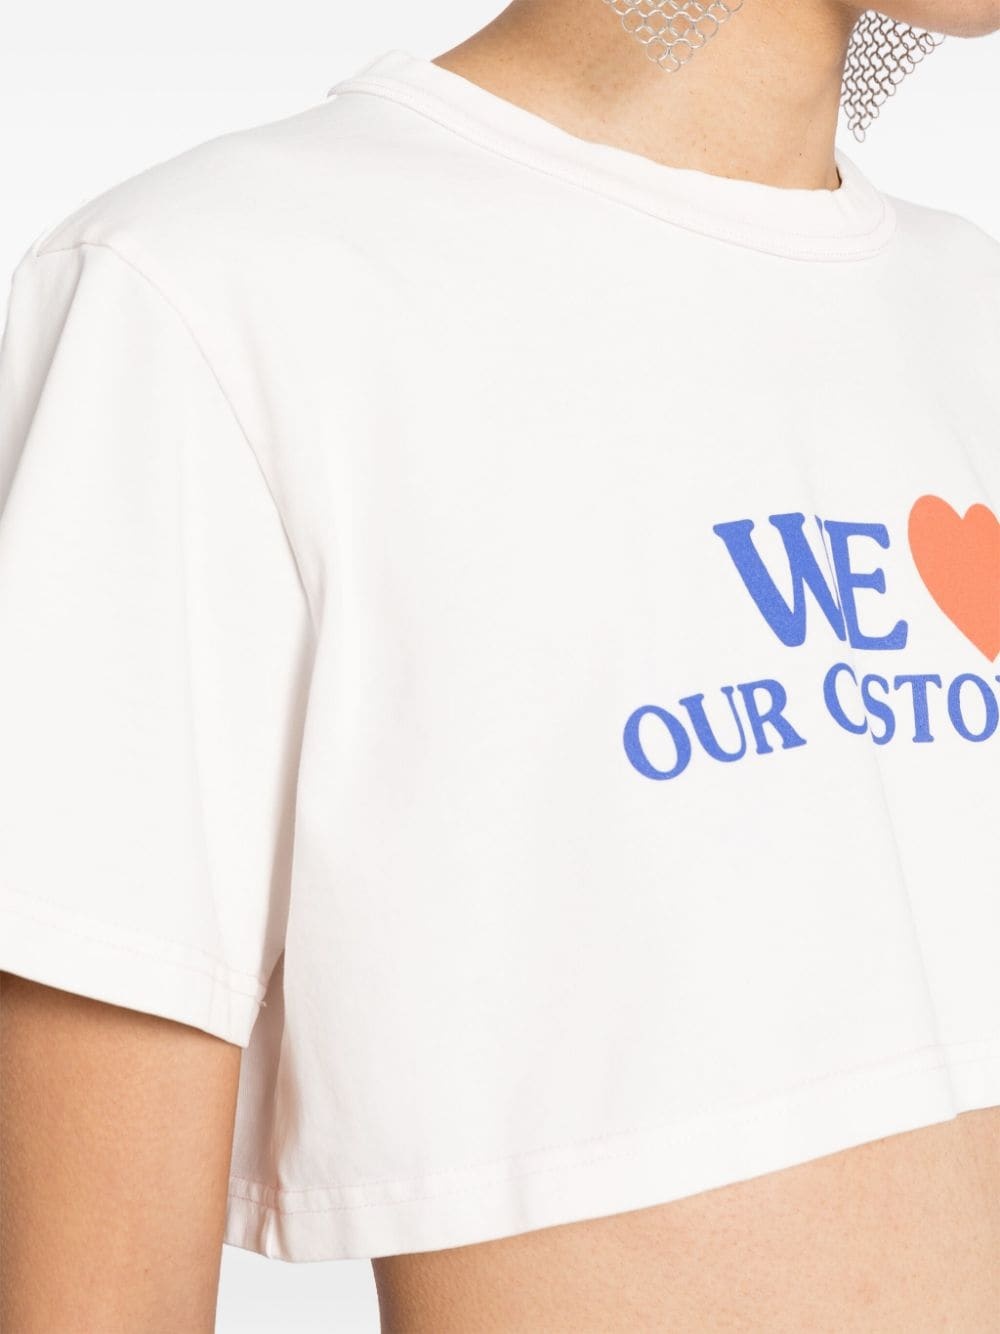 We Love Our Customers-print cotton T-shirt - 5